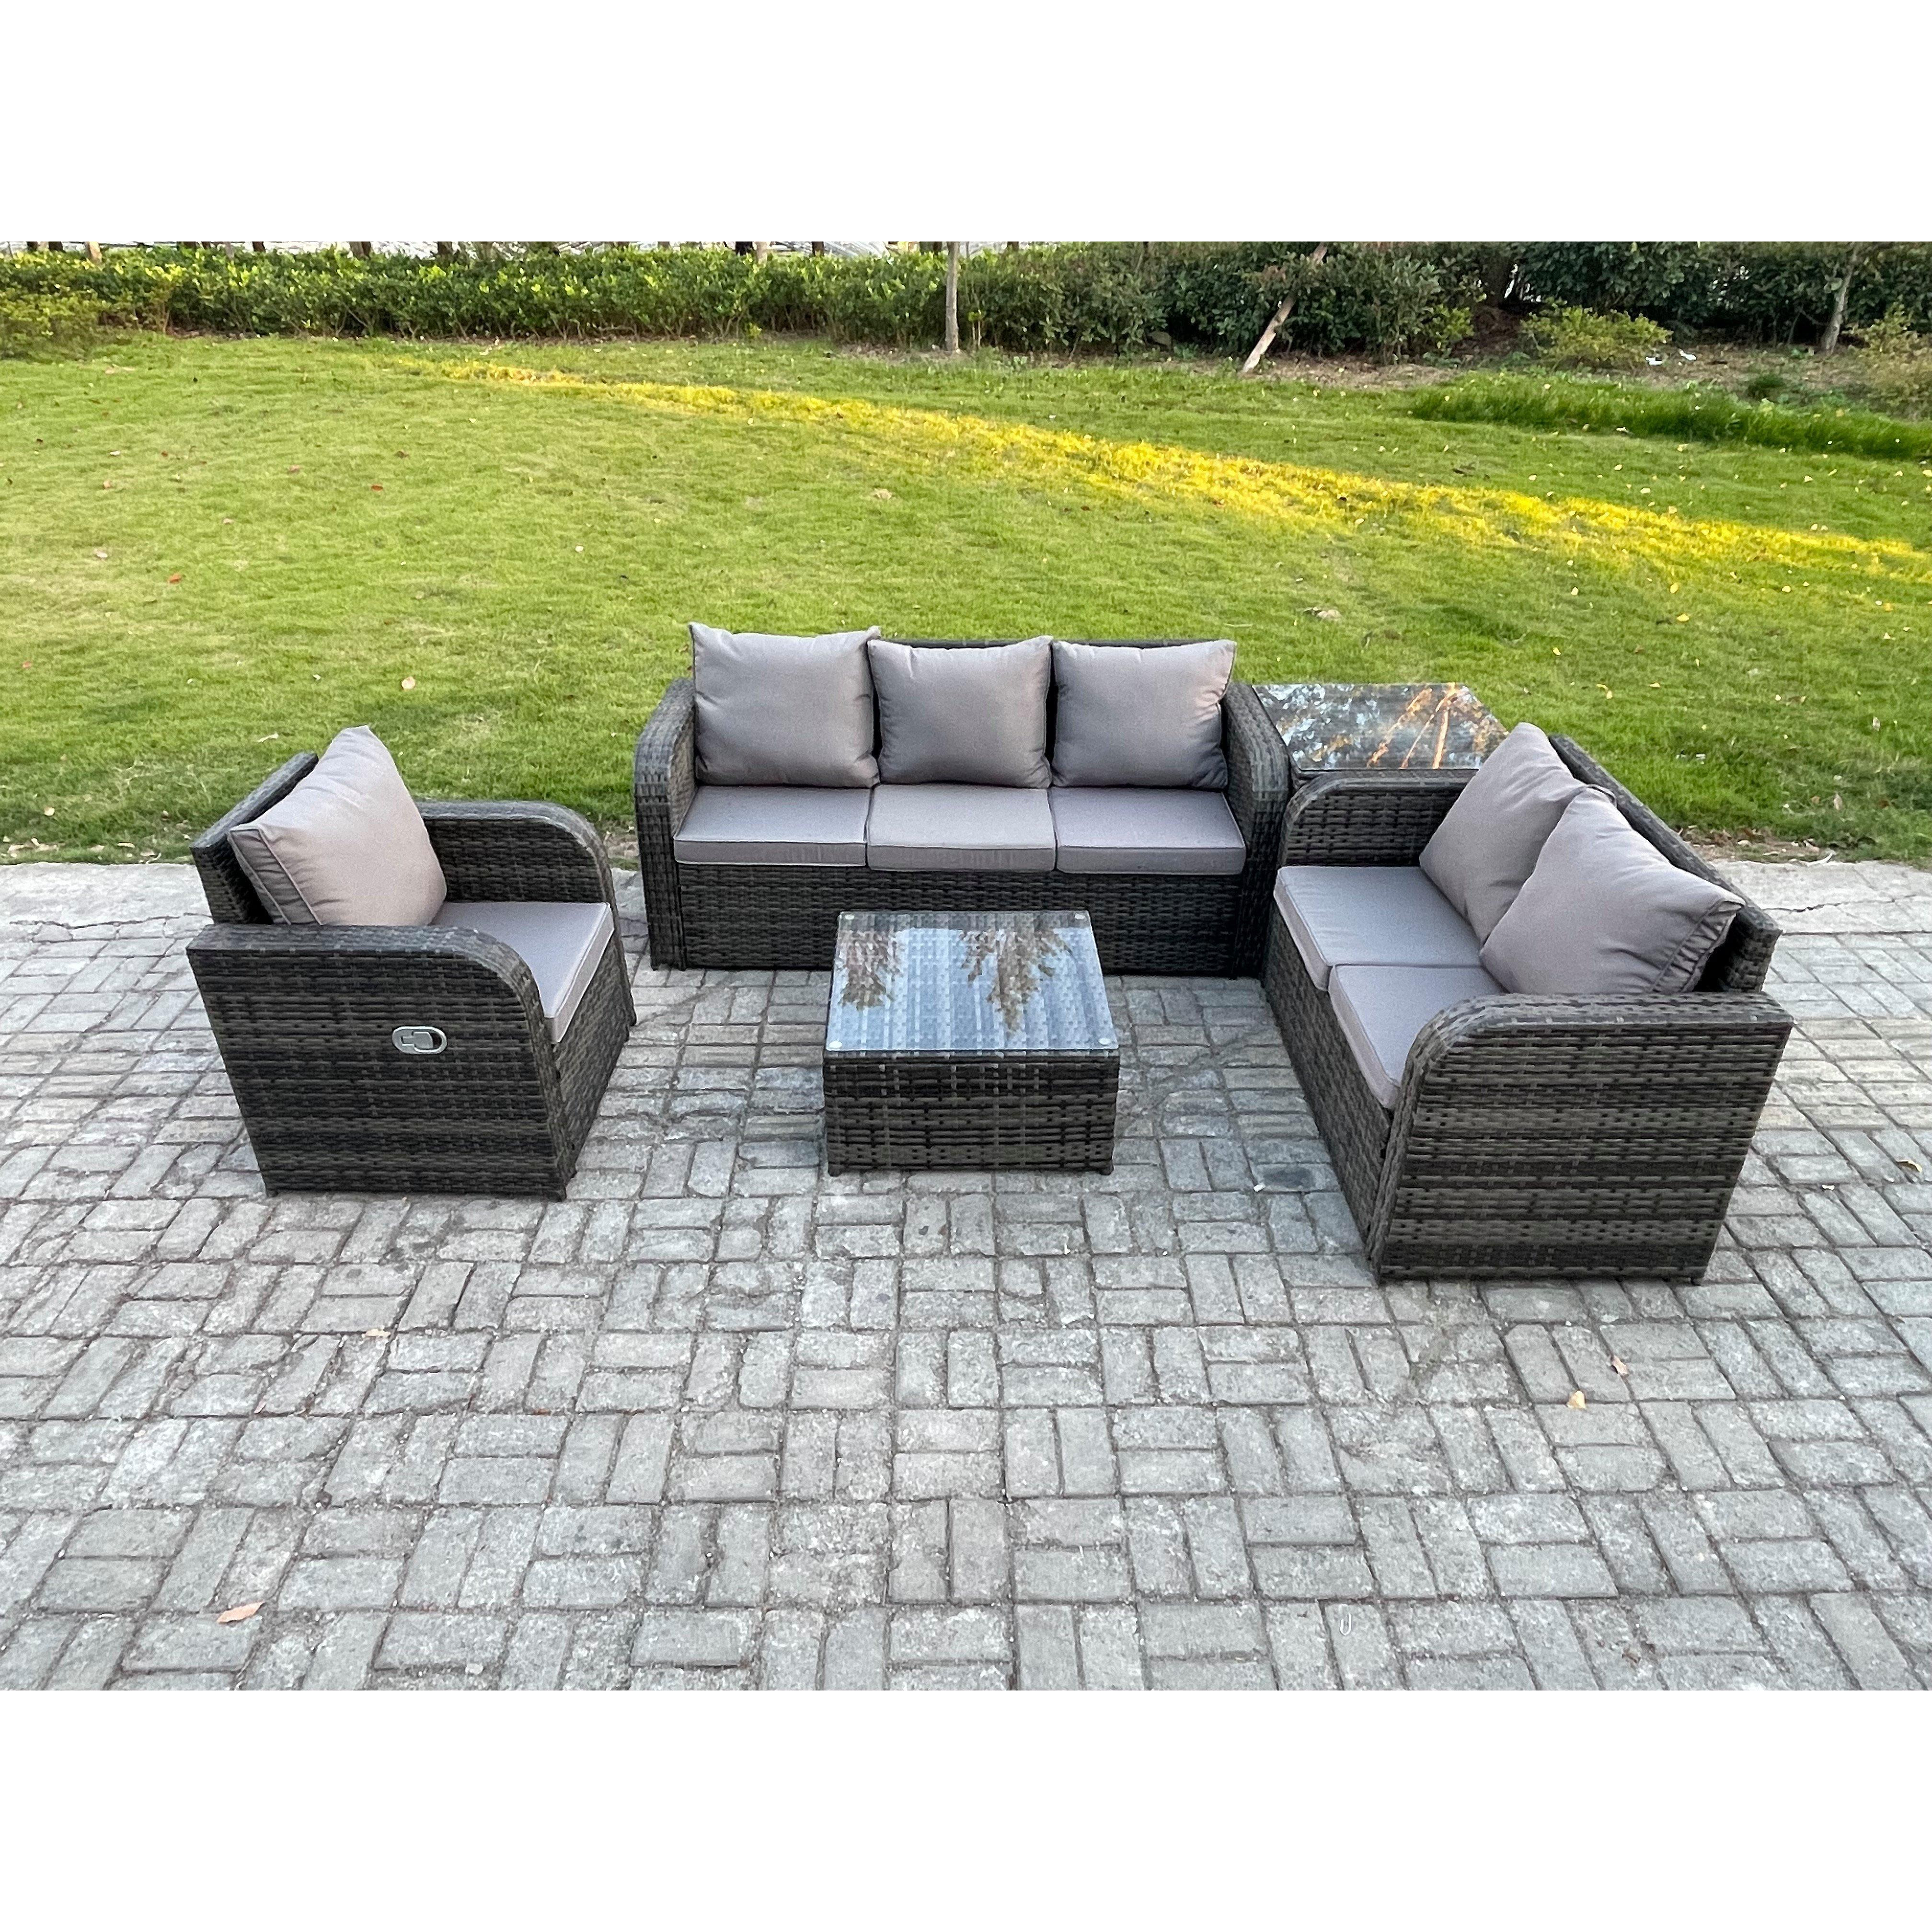 Rattan Garden Furniture 5 Piece Patio Set With Table Sofa Square Coffee Table Reclining Chair Loveseat sofa Side Table - image 1